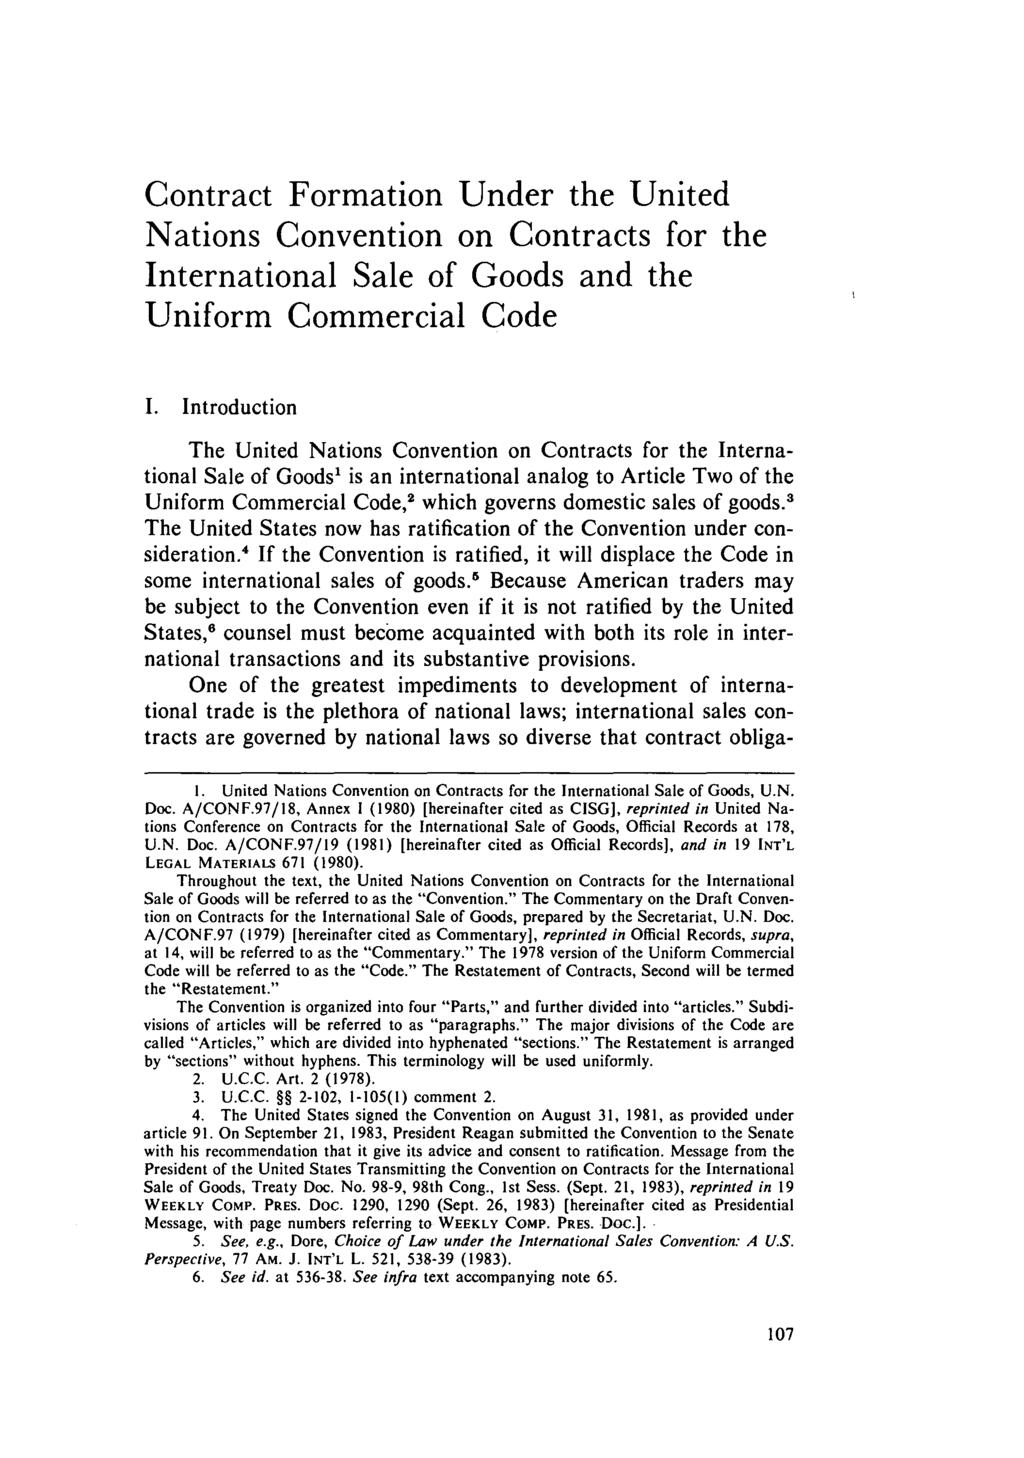 Contract Formation Under the United Nations Convention on Contracts for the International Sale of Goods and the Uniform Commercial Code I.